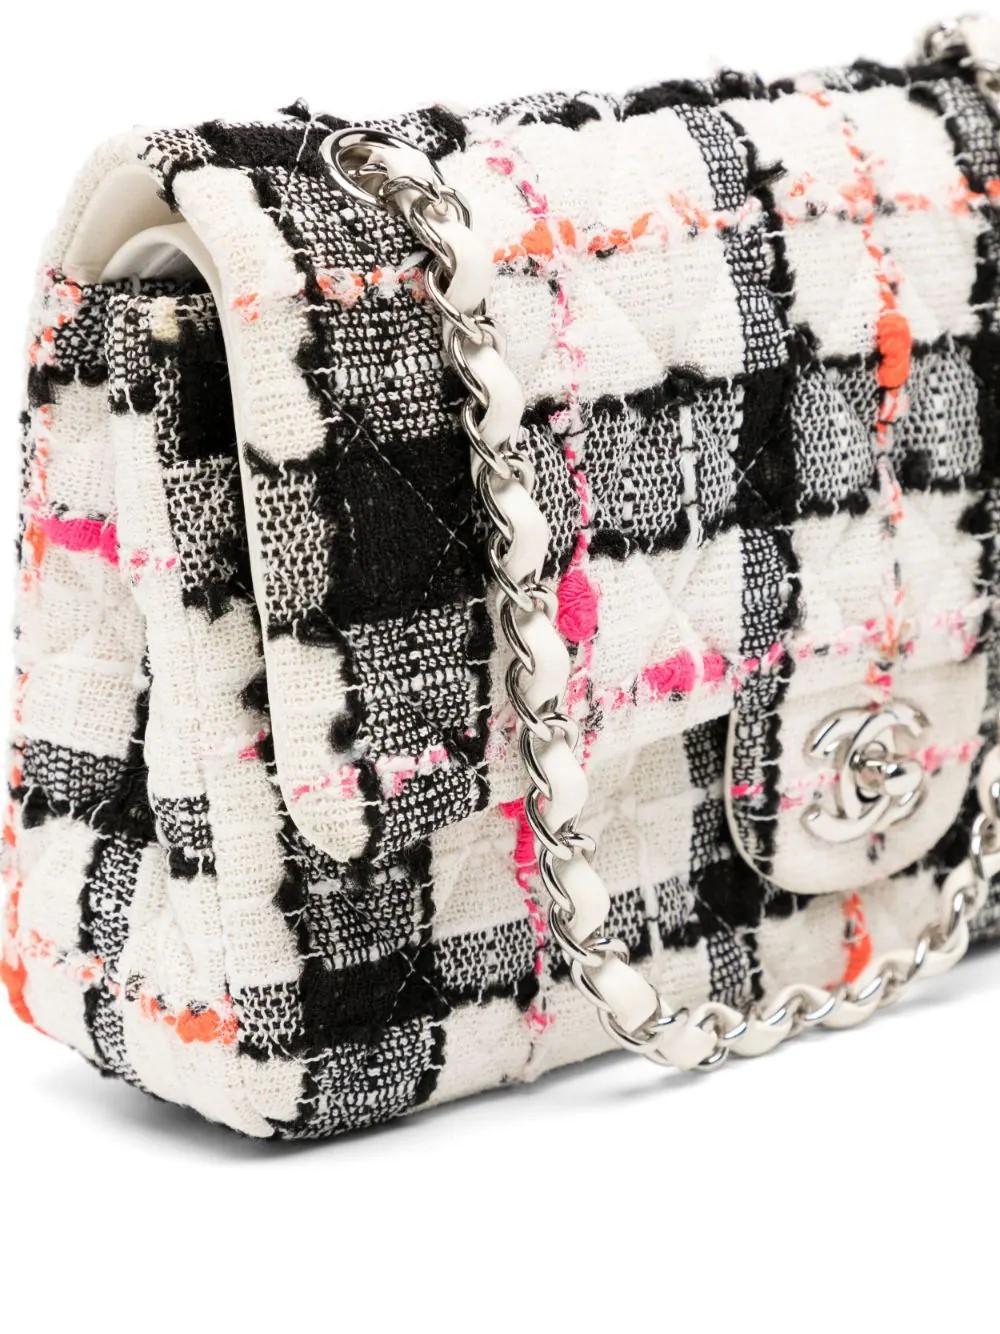 This medium tweed double flap from the Spring 2020 Ready-to-Wear collection features a tweed exterior and white calfskin interior with silver toned hardware and neon accents. These quality materials ensure a stylish and long-lasting addition to your